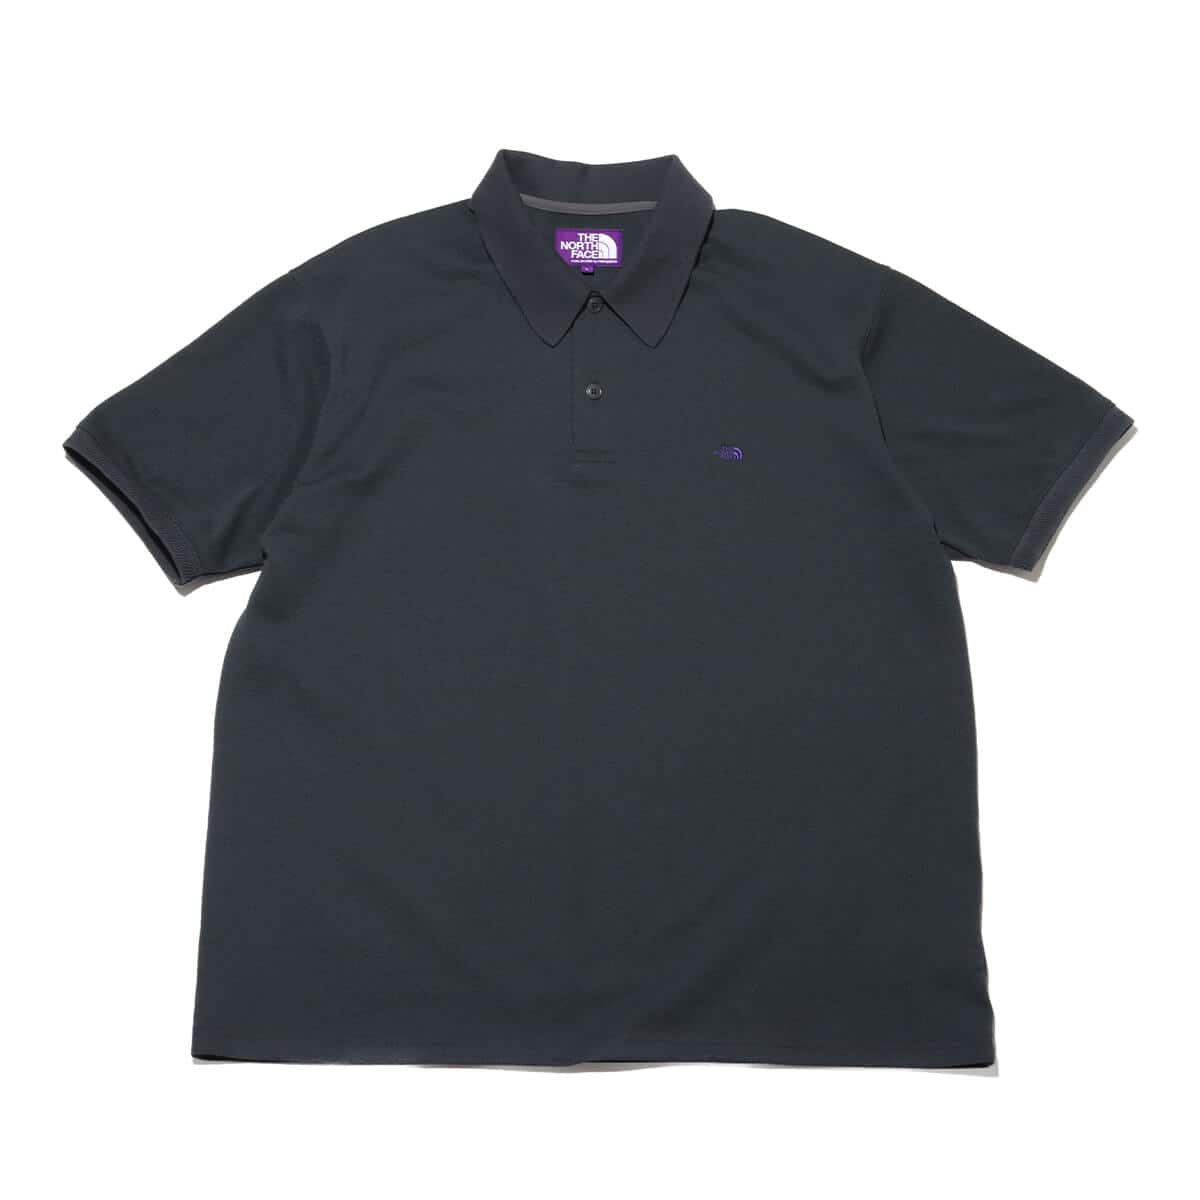 THE NORTH FACE PURPLE LABEL Moss Stitch Field Short Sleeve Polo 